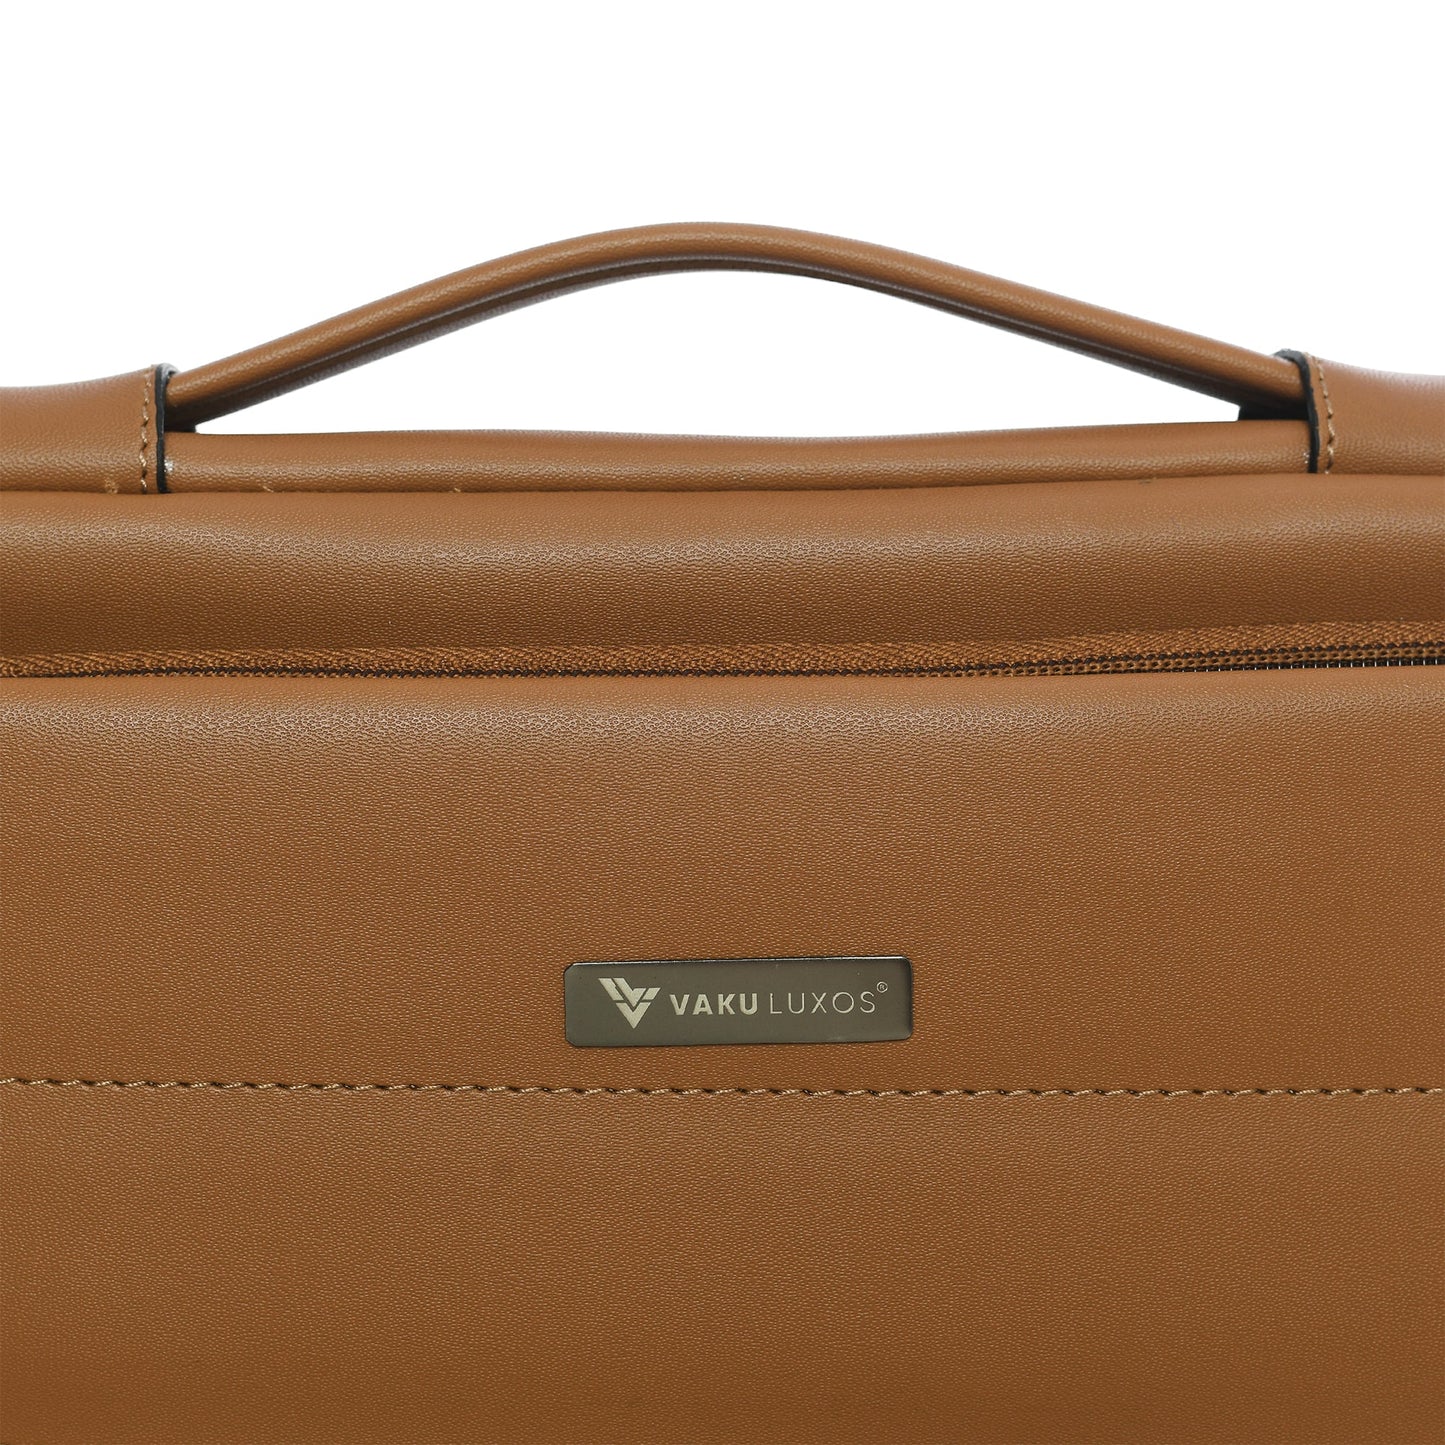 vaku-luxos®-lasa-chivelle-premium-collection-sleeve-for-macbook-13-14-with-strap-highly-durable-mustard8905129017866